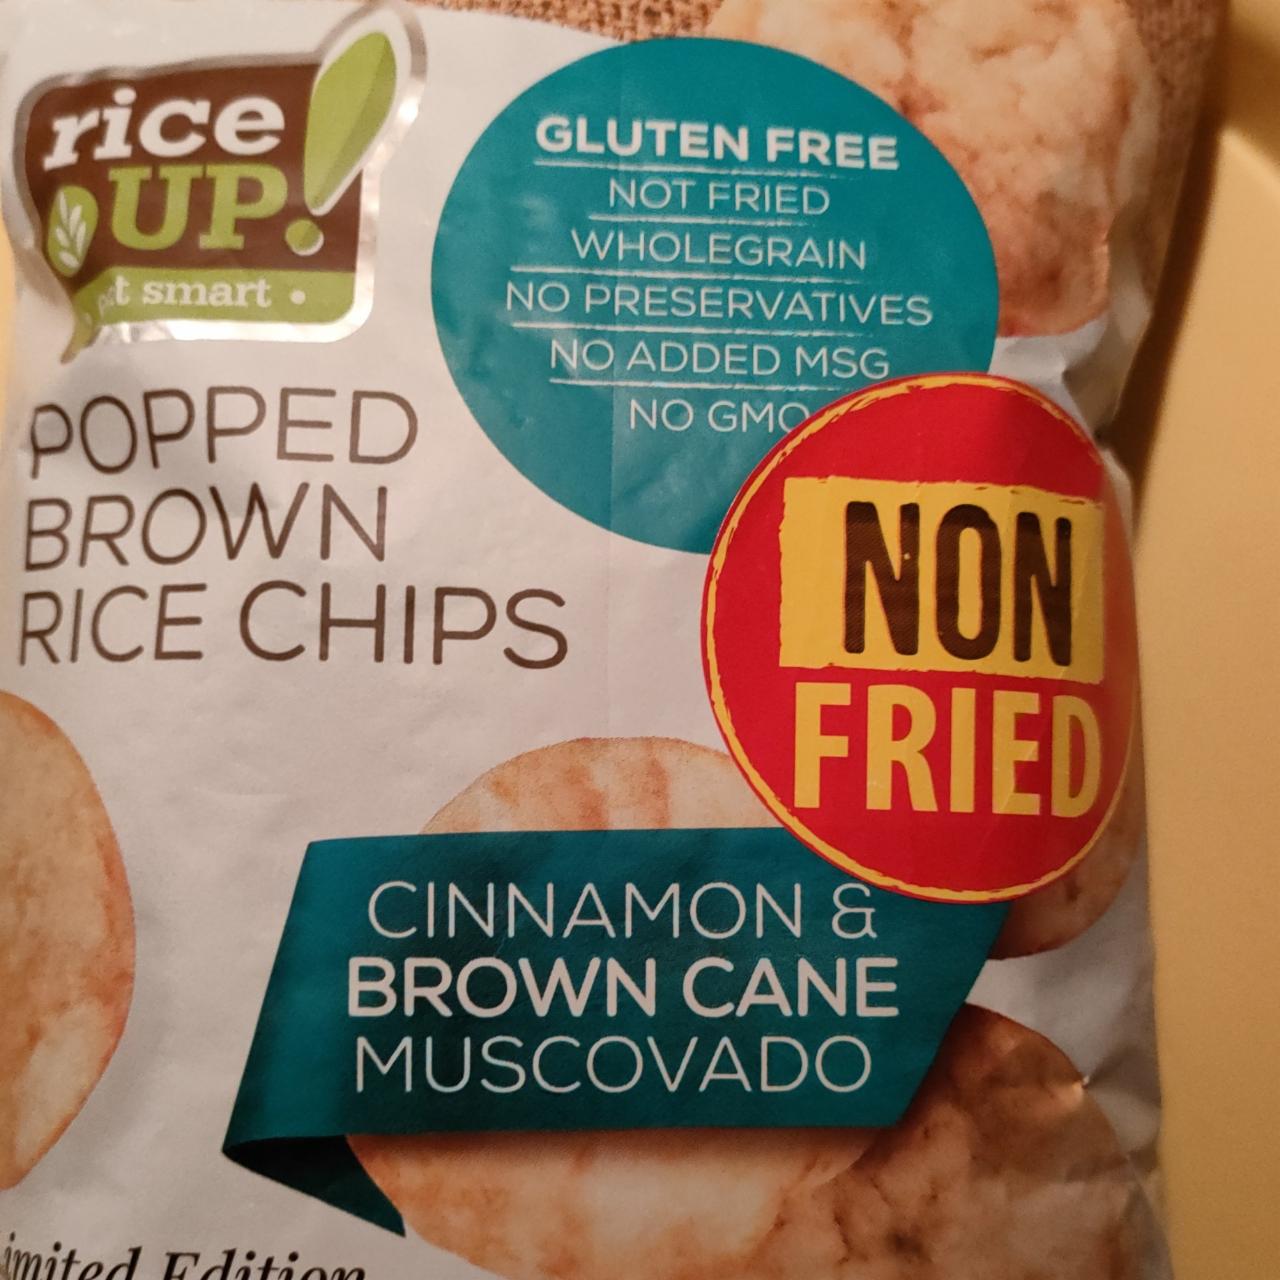 Képek - Popped brown rice chips Cinnamon & brown cane muscowado Rice Up!